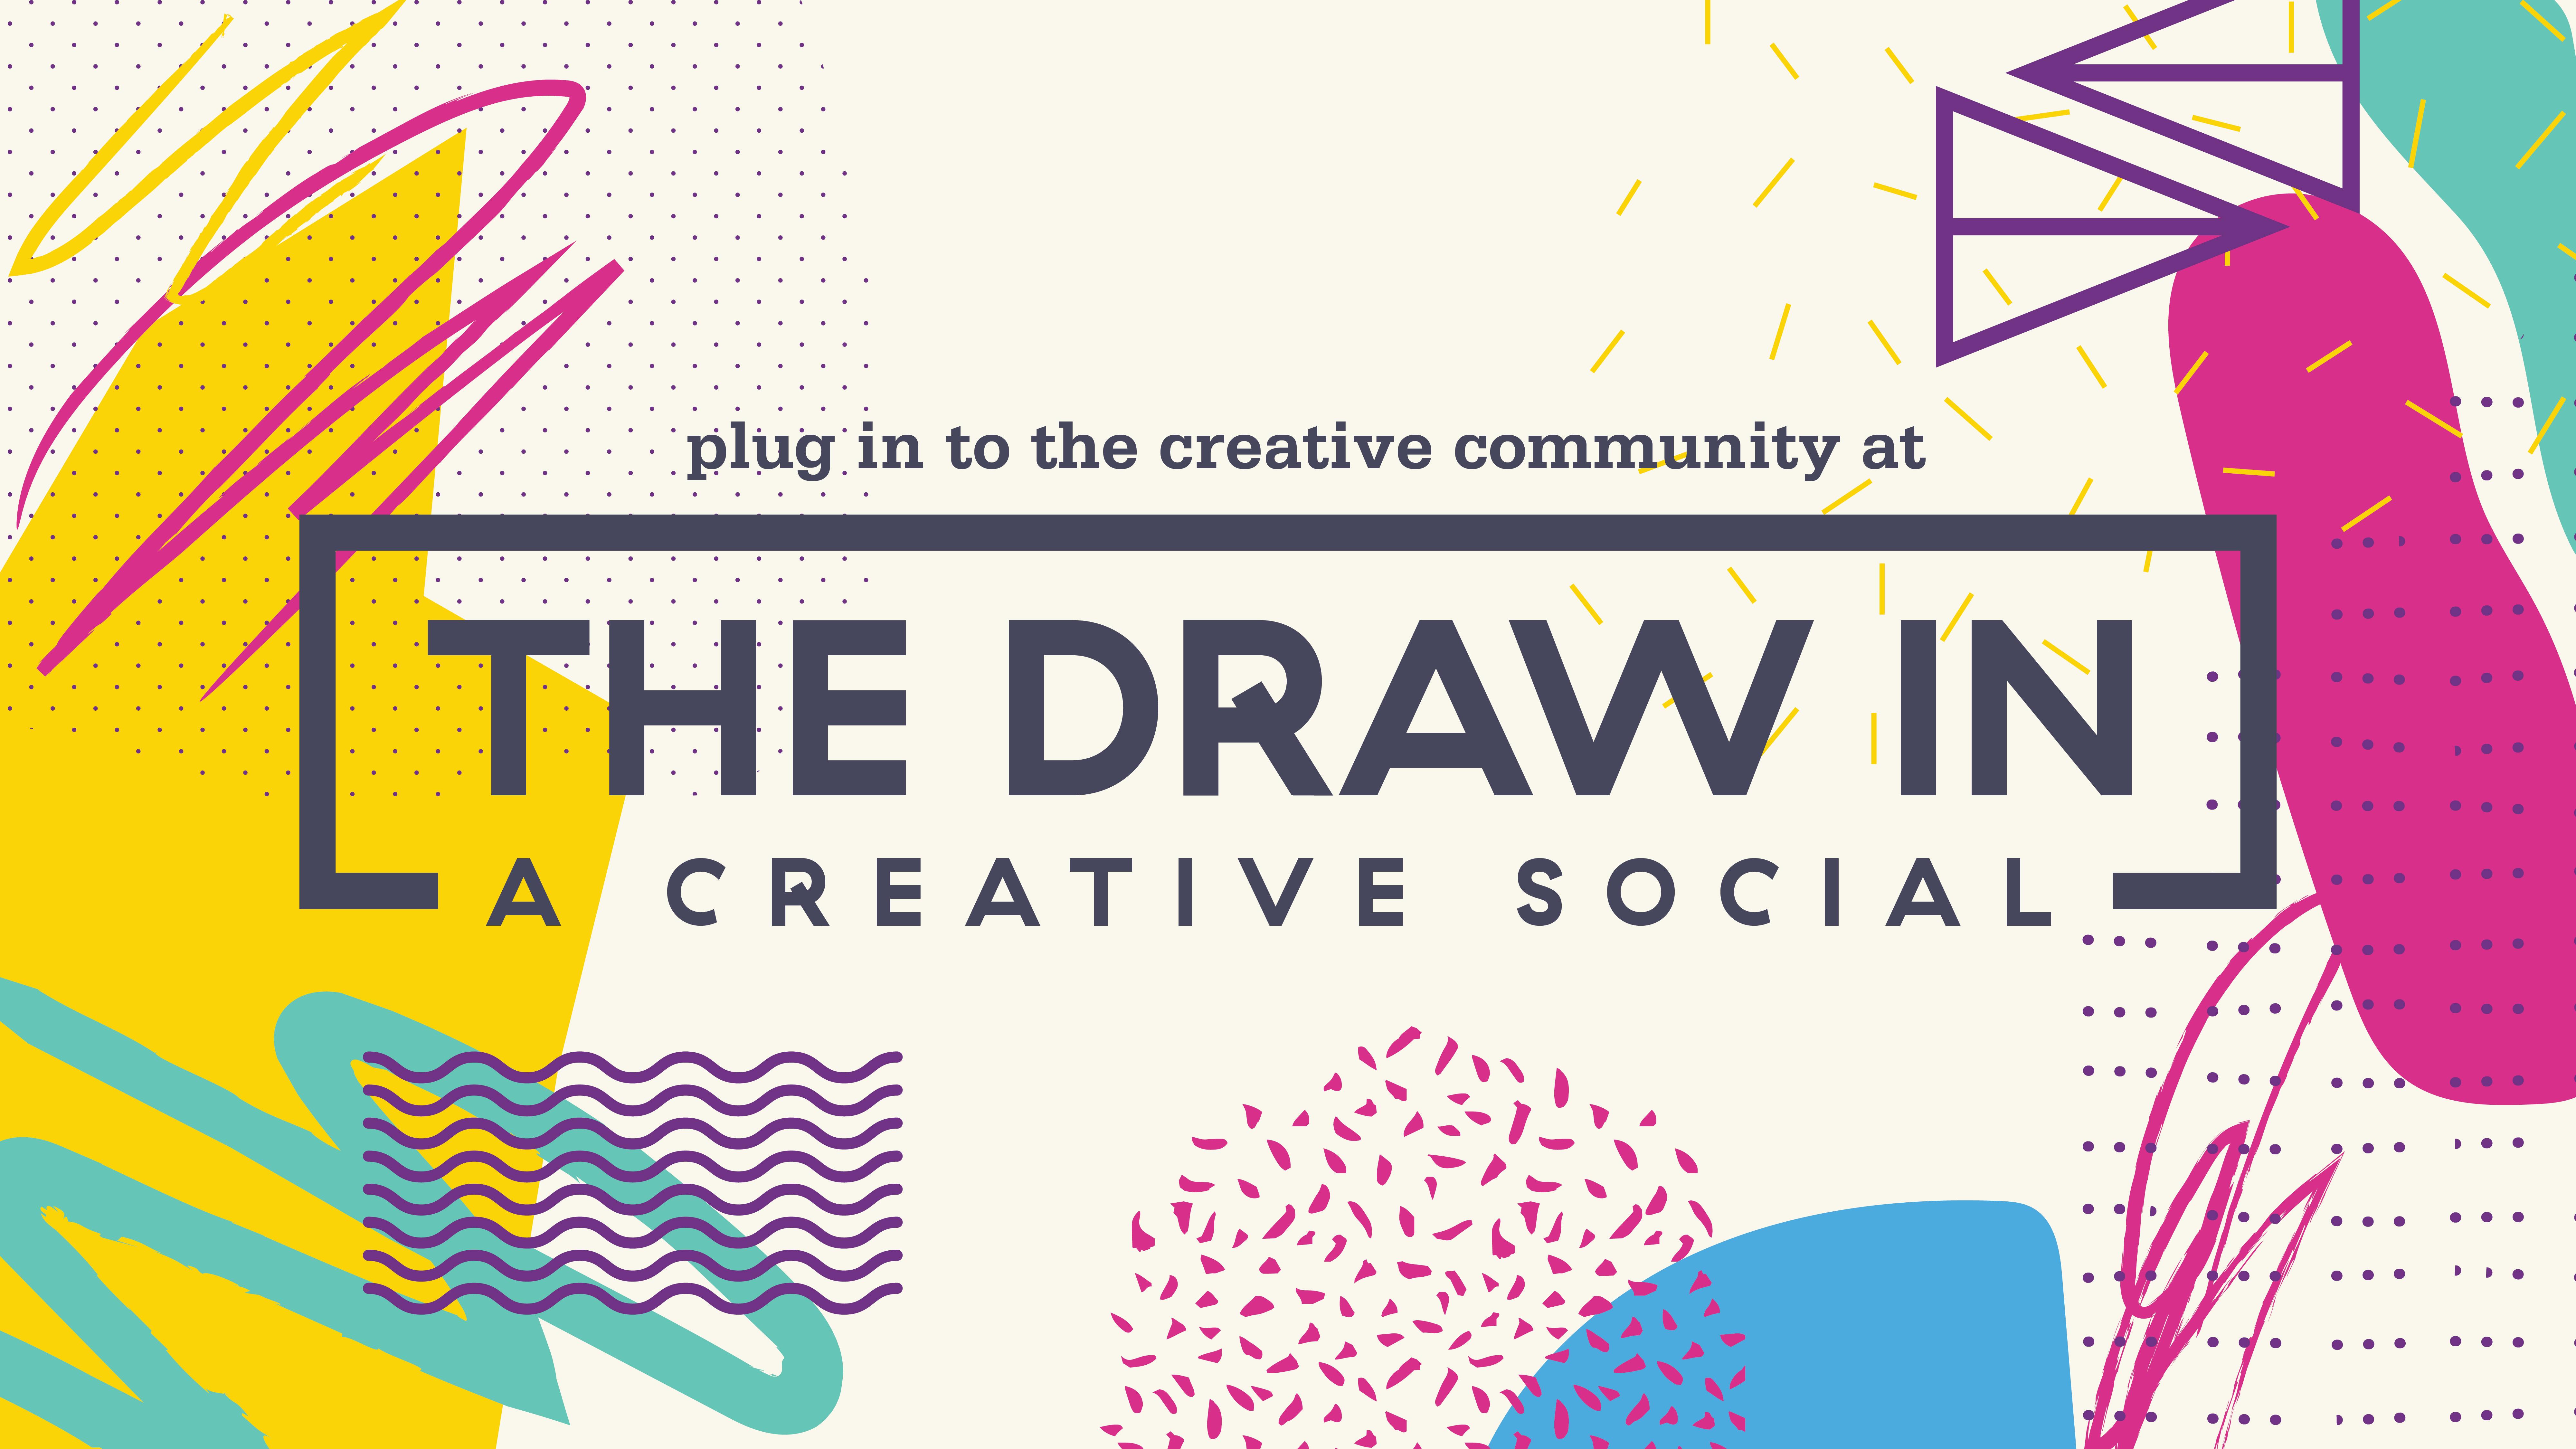 The Draw In, a creative social